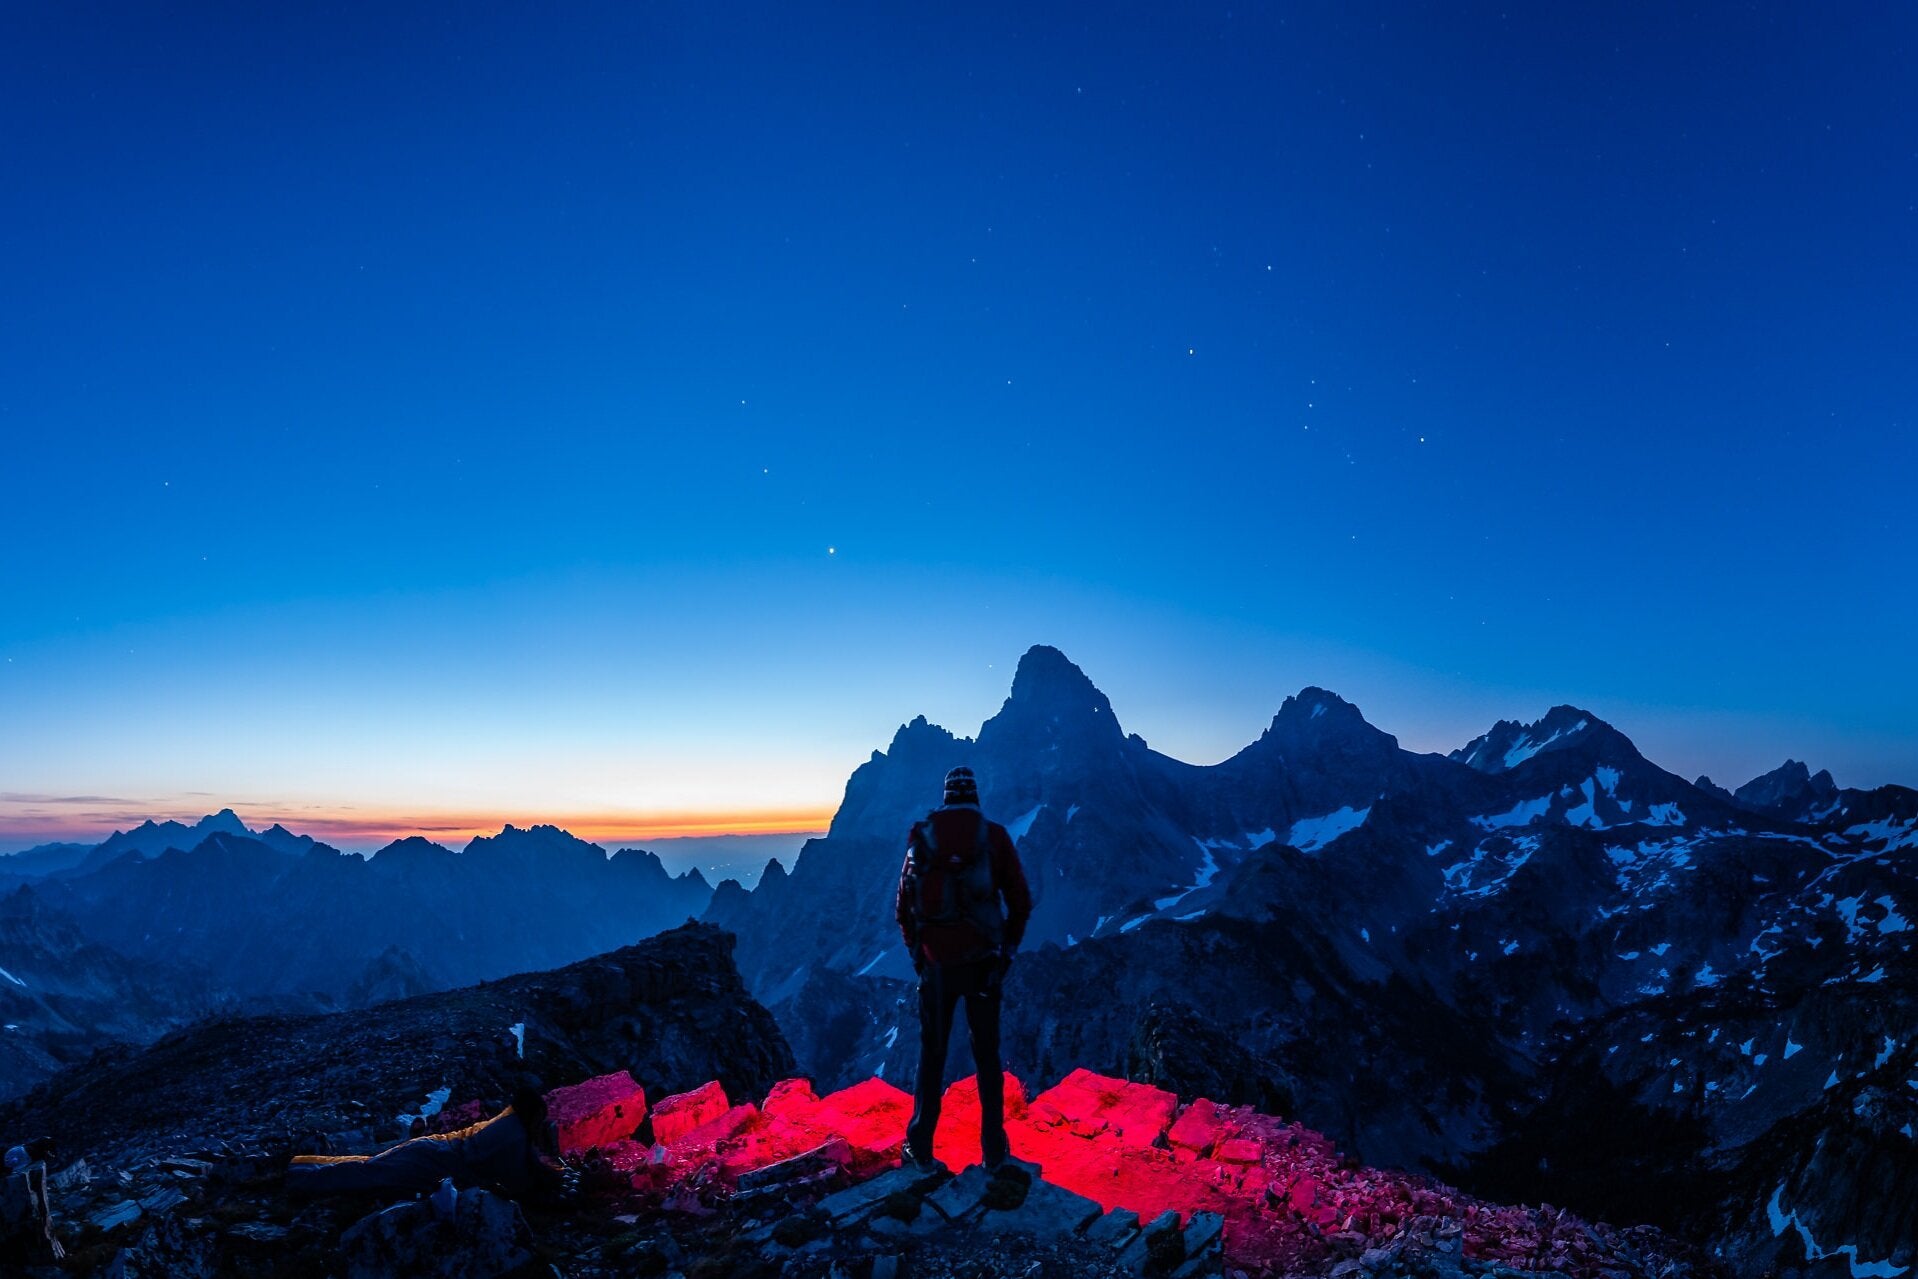 Sean Hoyt and his red headlamp await the arrival of sunrise at Grand Teton National Park.